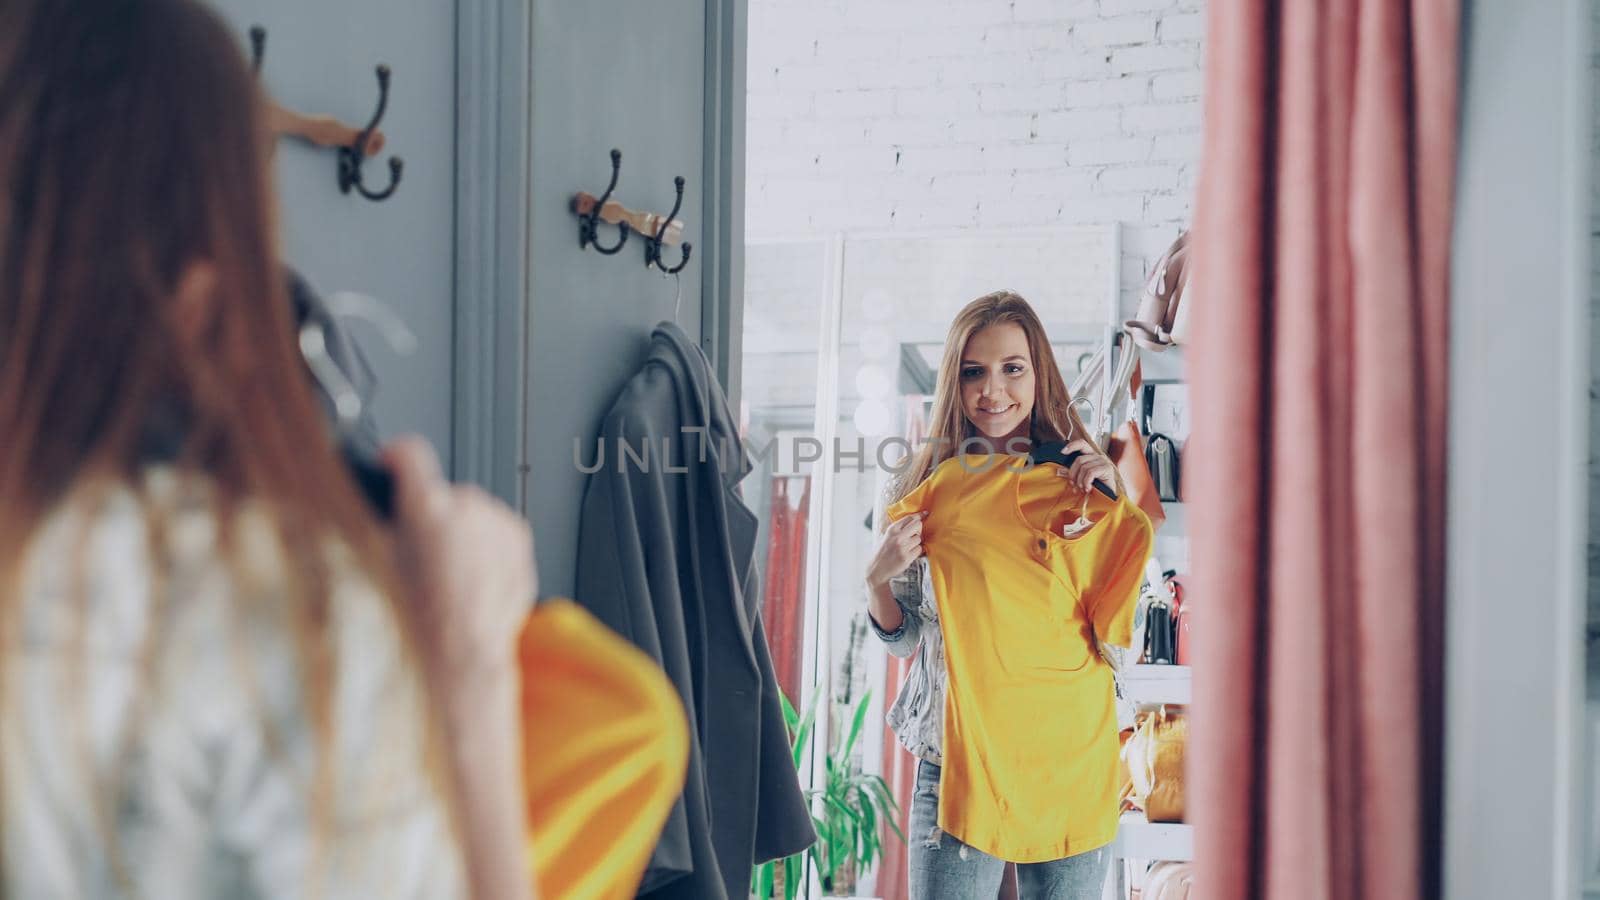 Mirror shot of young lady choosing clothes in fitting room. Girl is trying top checking size and length while standing opposite large mirror. Nice clothing store in background.